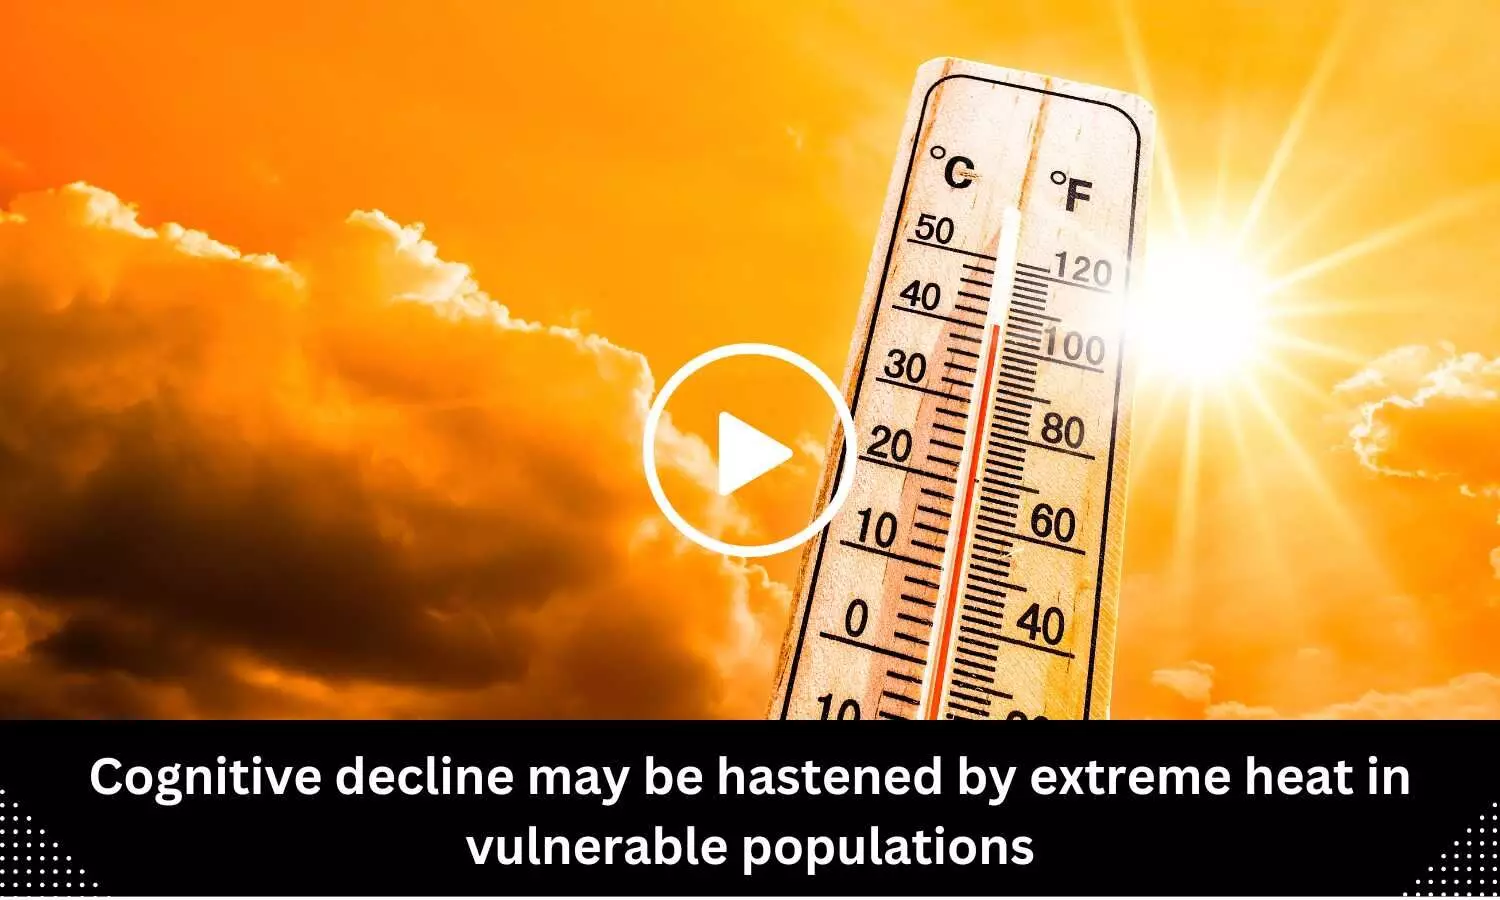 Cognitive decline may be hastened by extreme heat in vulnerable populations